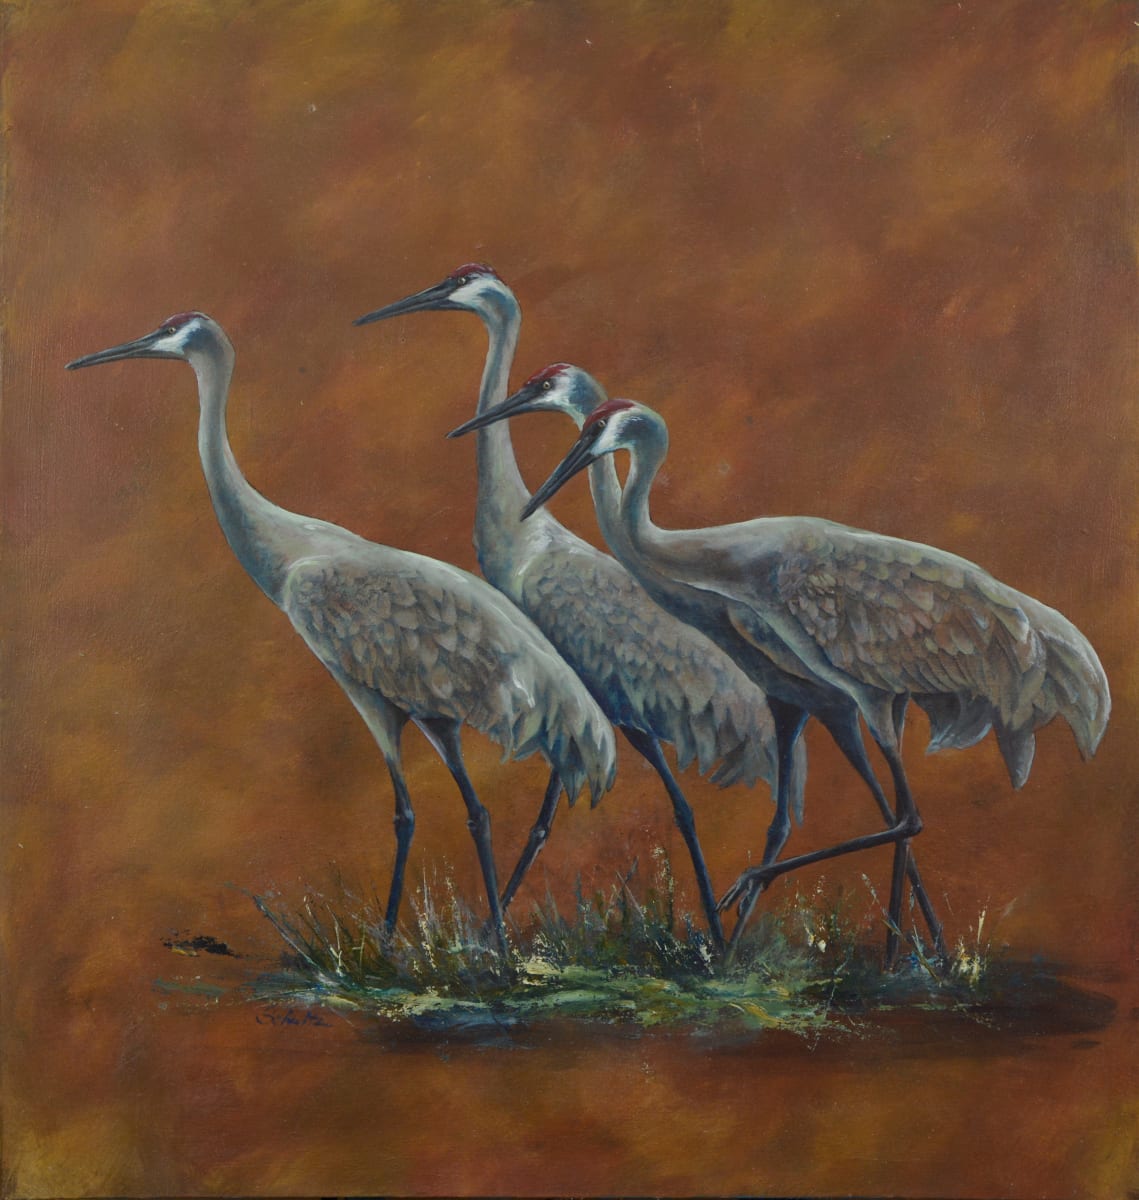 Out For A Stroll by Sandra Schultz  Image: Sandhill Cranes